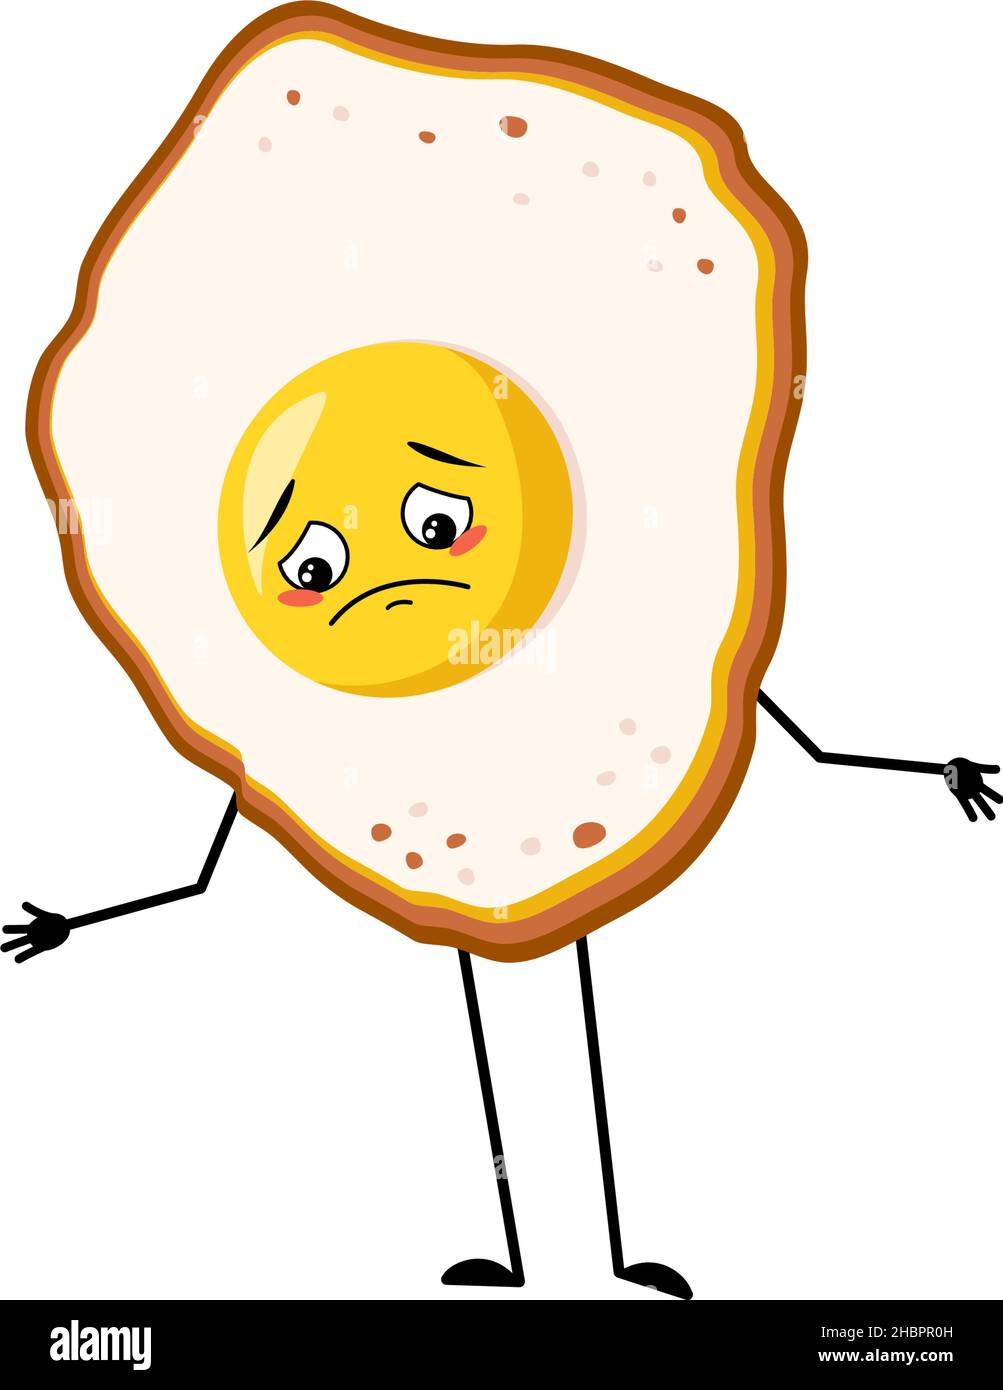 Cute character scrambled eggs with yolk and protein with sad emotions, depressed face, down eyes, arms and legs. Fun food for breakfast with melancholy expression. Vector illustration Stock Vector